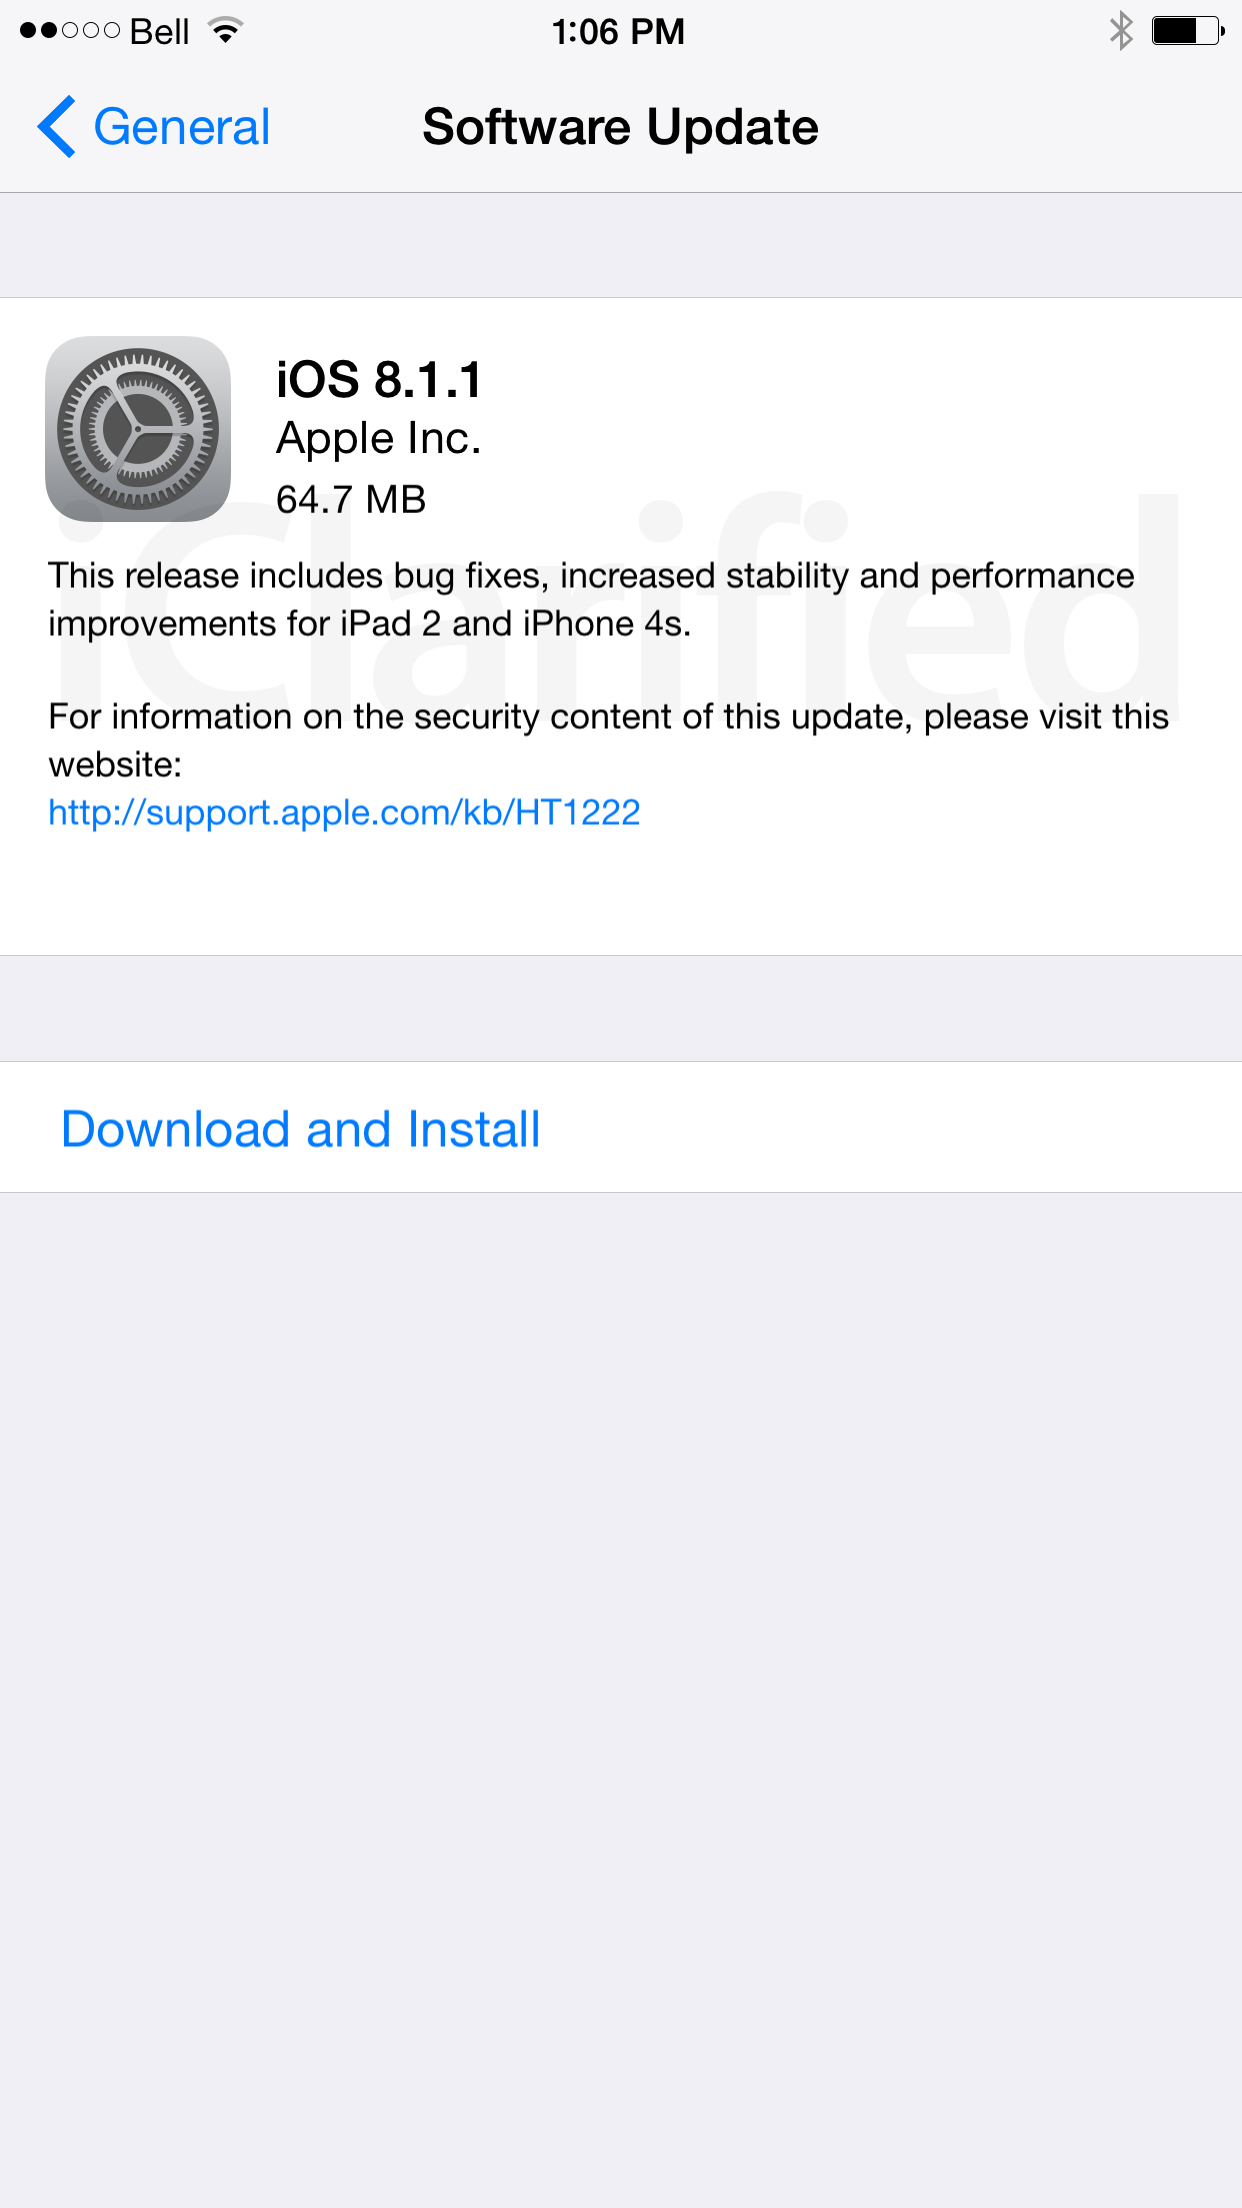 Apple Releases iOS 8.1.1 Bringing Improvements for iPad 2 and iPhone 4S